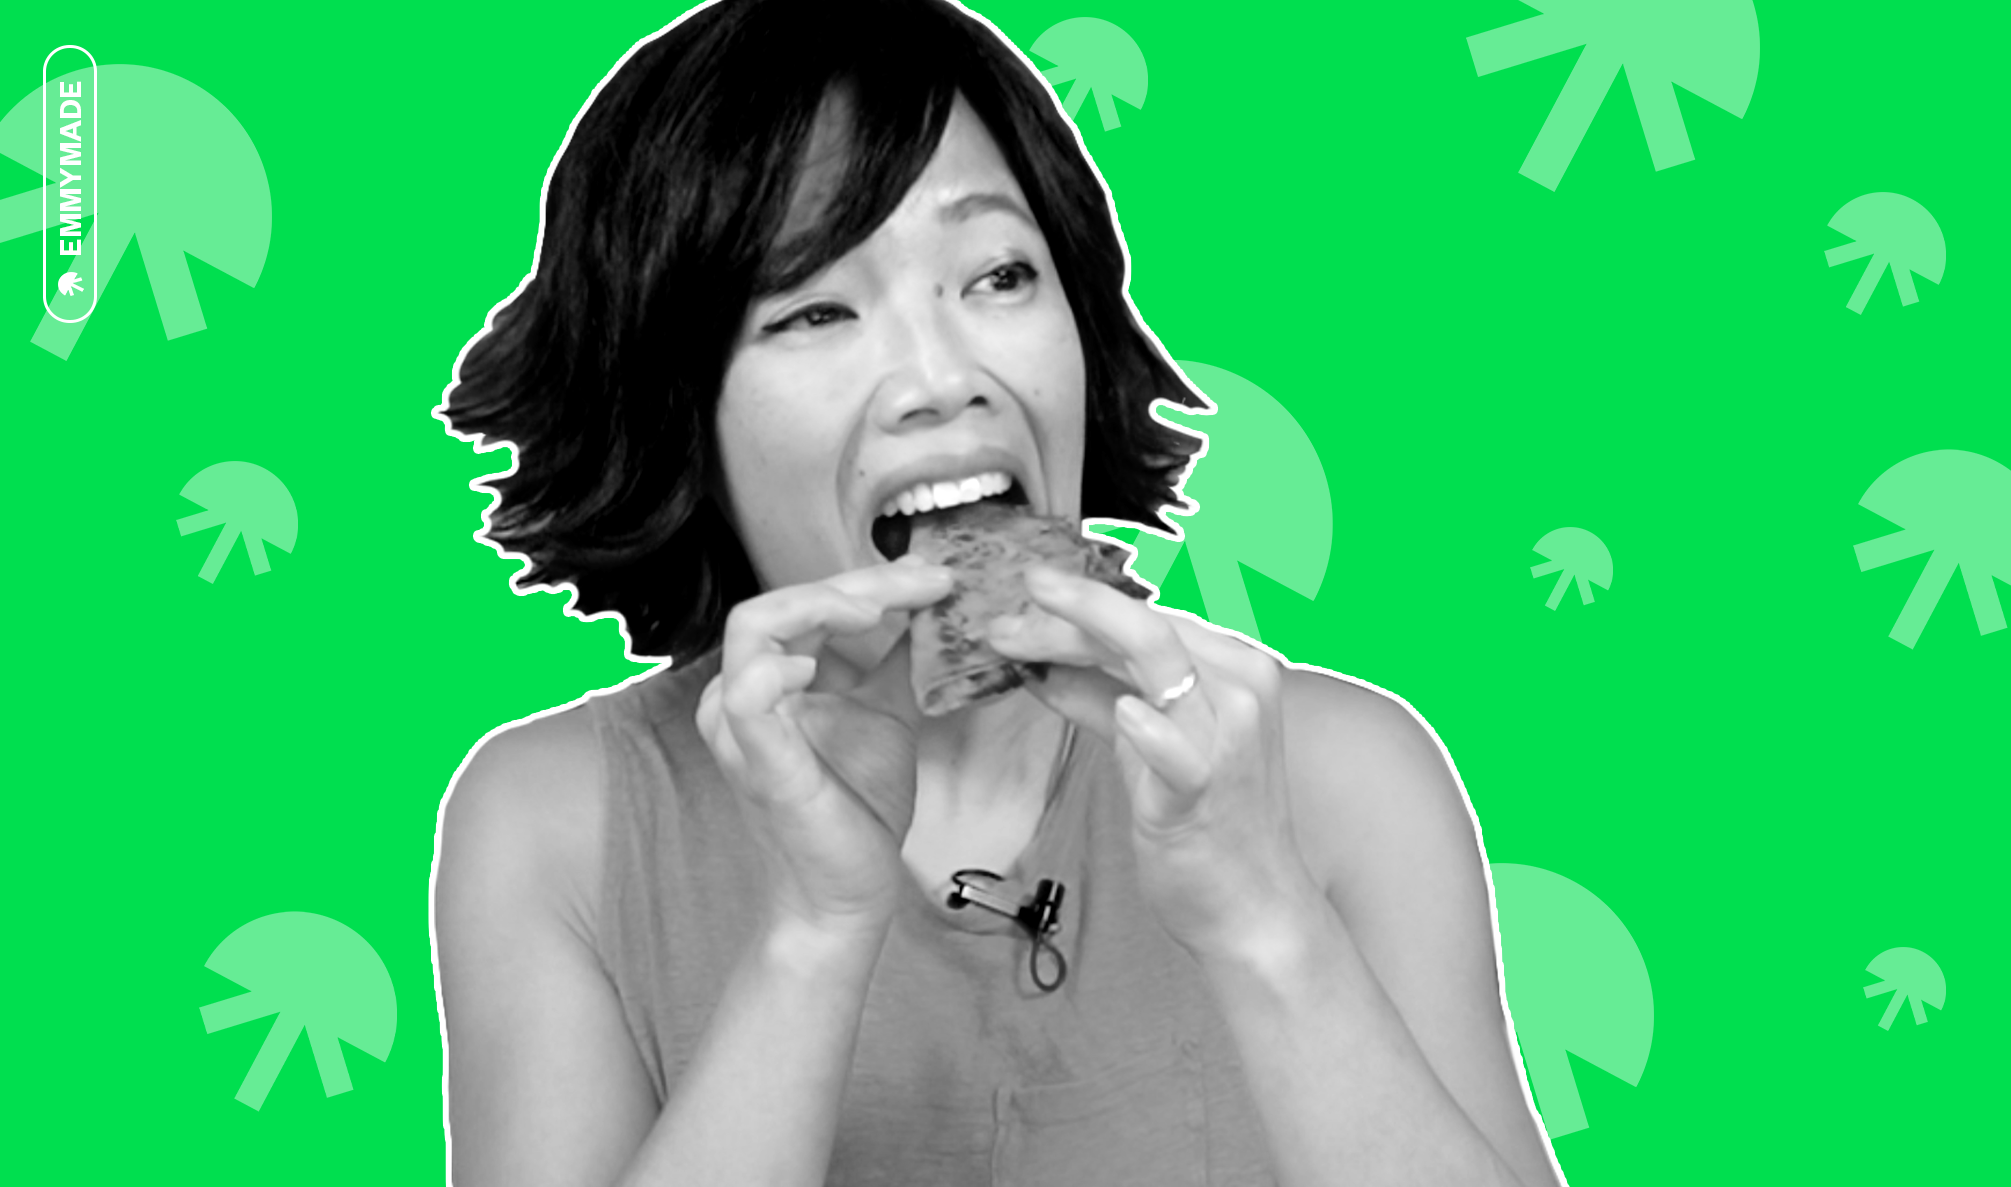 Creator Emmymade taking a bite out of food in black and white on a green background with jellyfish icons.